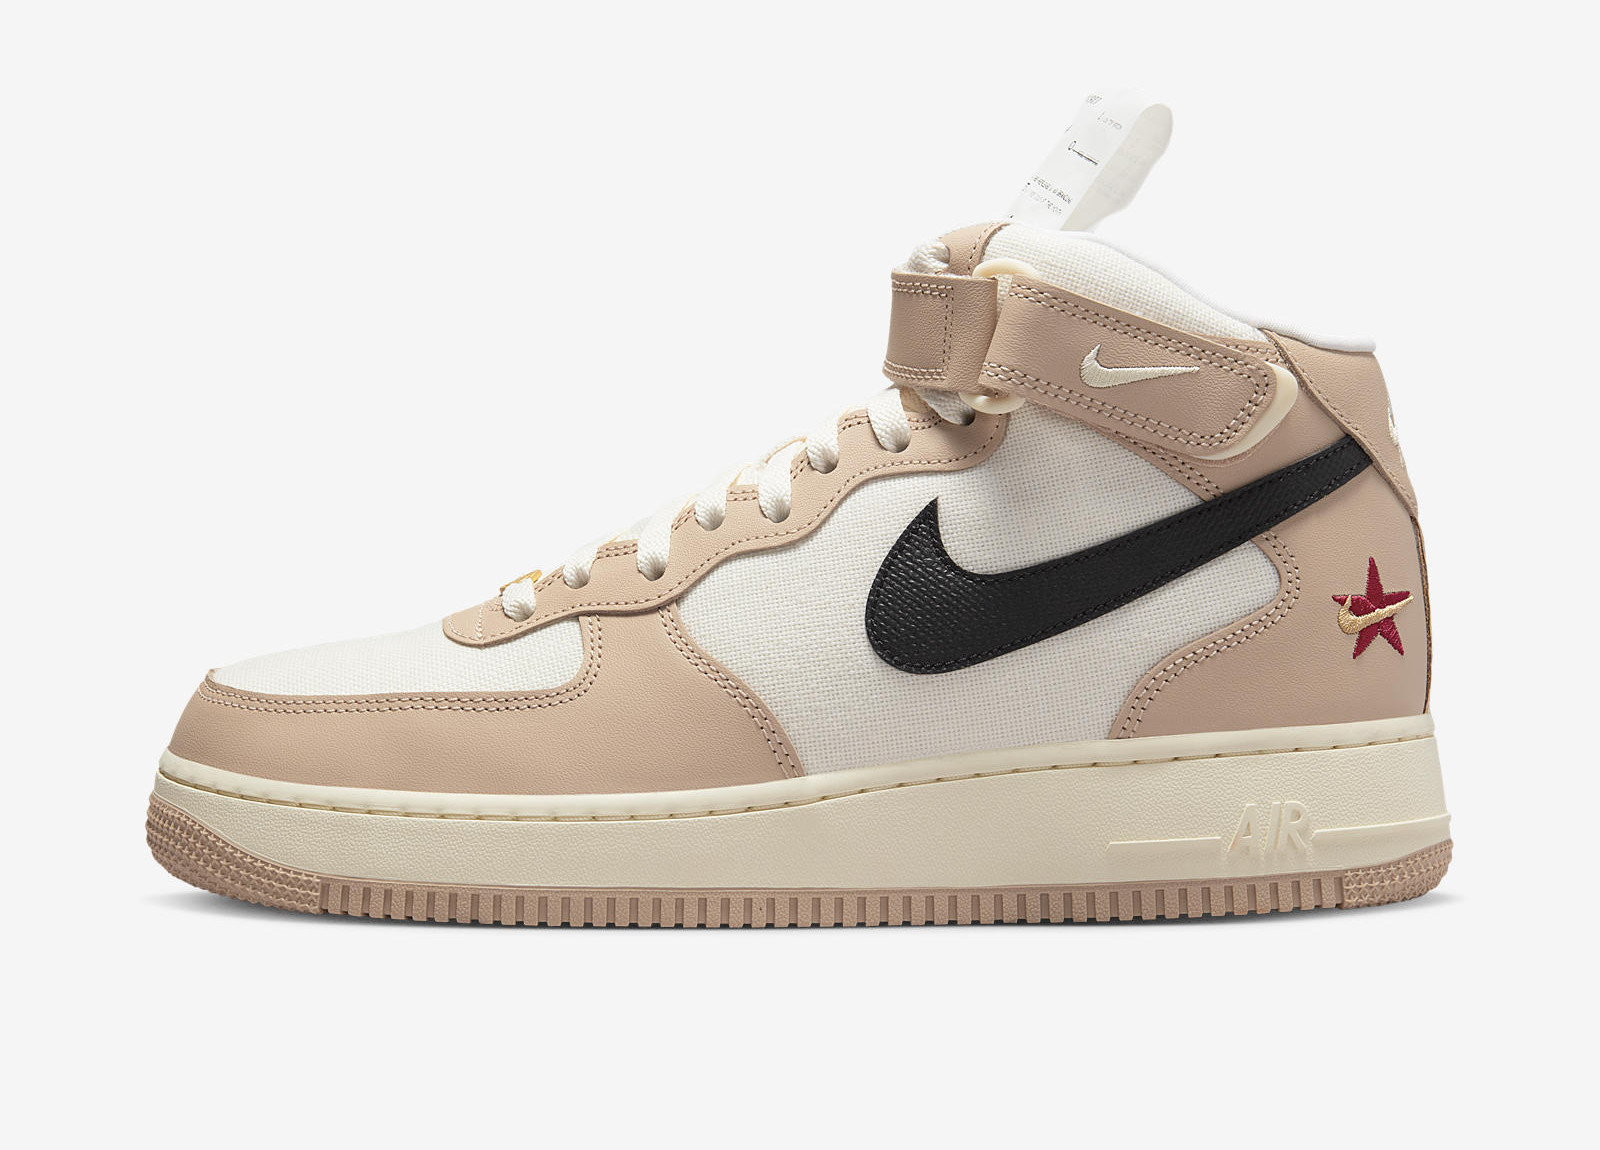 Nike Air Force 1 Mid
« Pale Ivory »